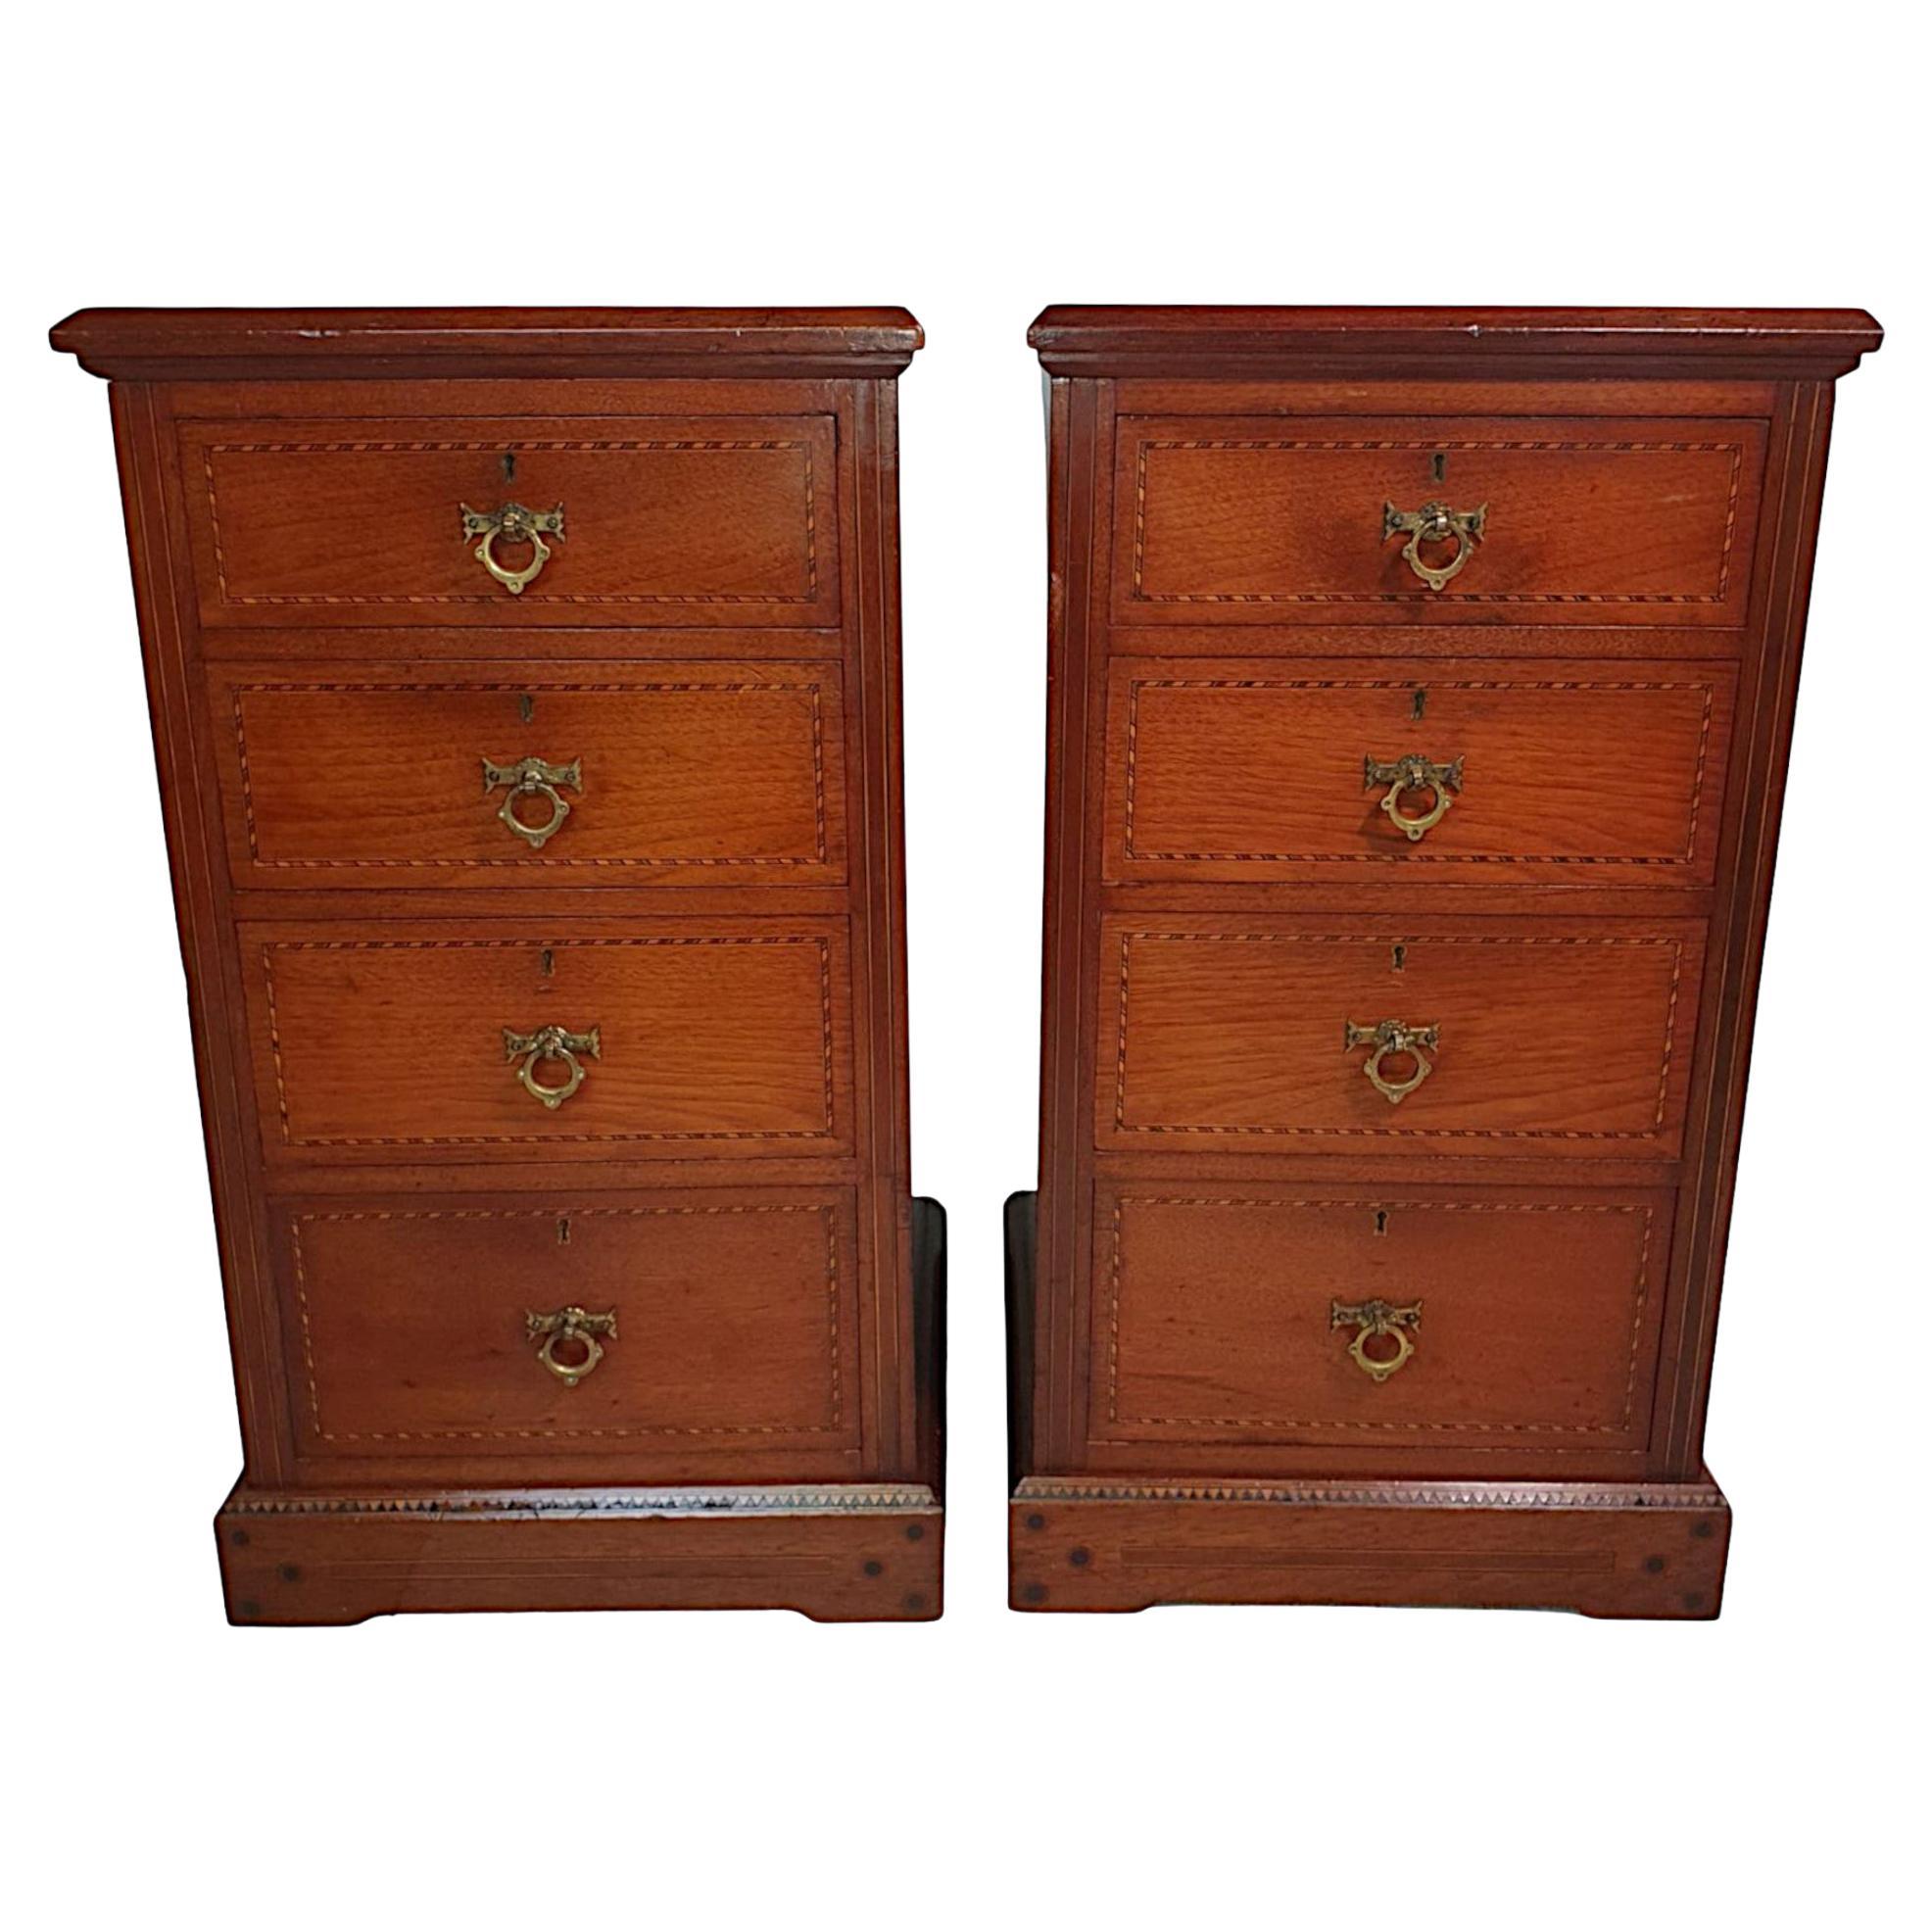 Lovely Quality Pair of 19th Century Inlaid Bedside Chests For Sale